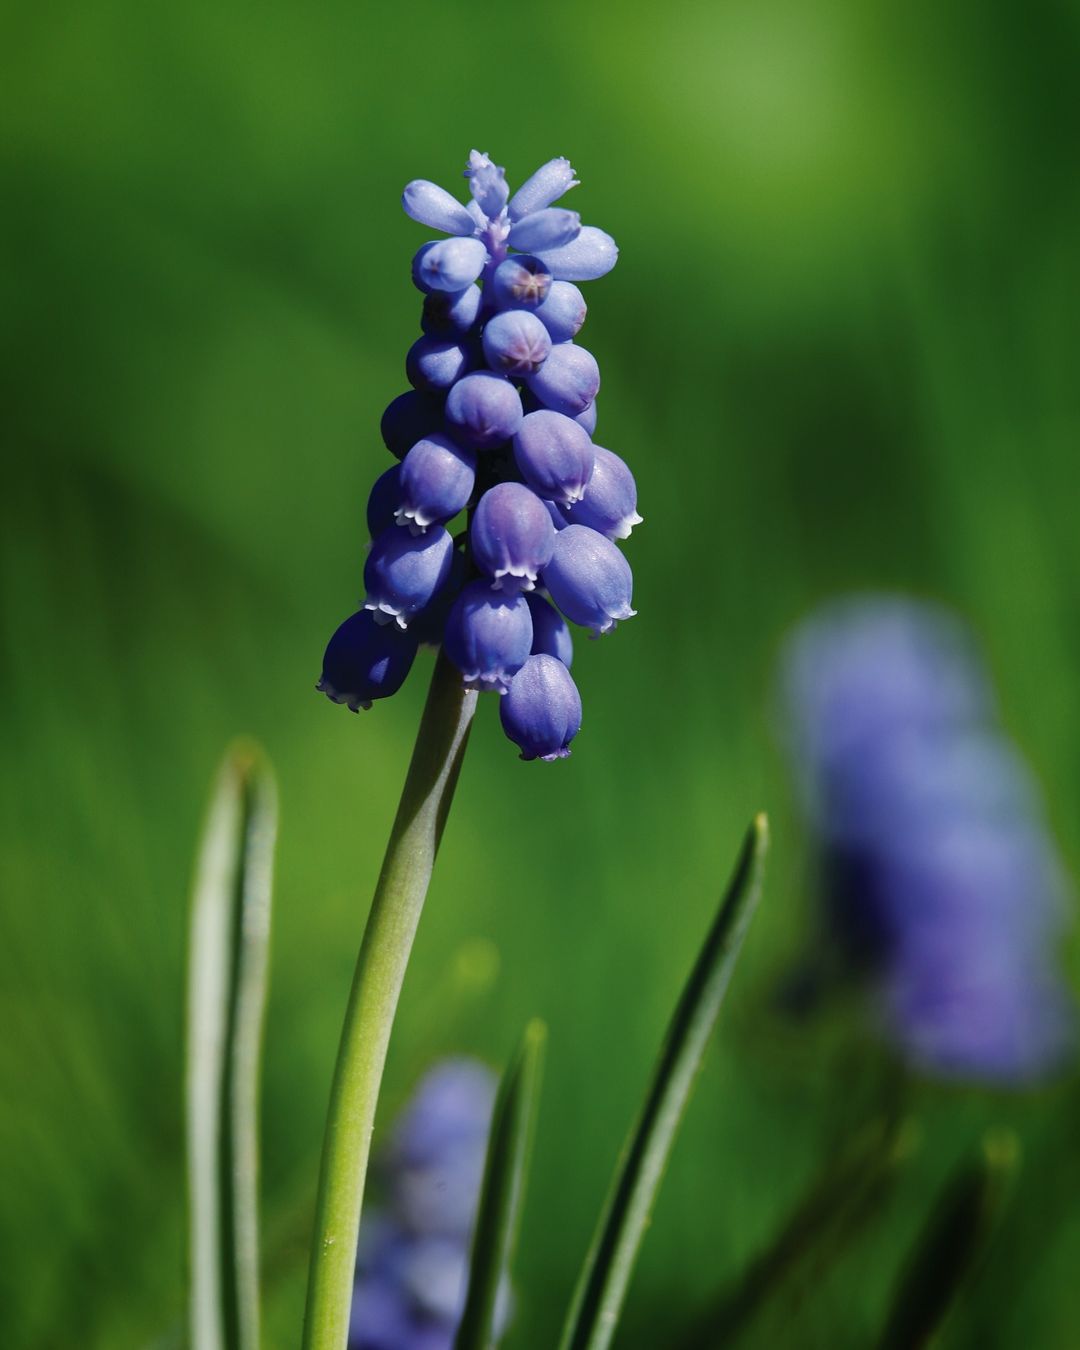  Blue Muscari flower with green leaves in the background.